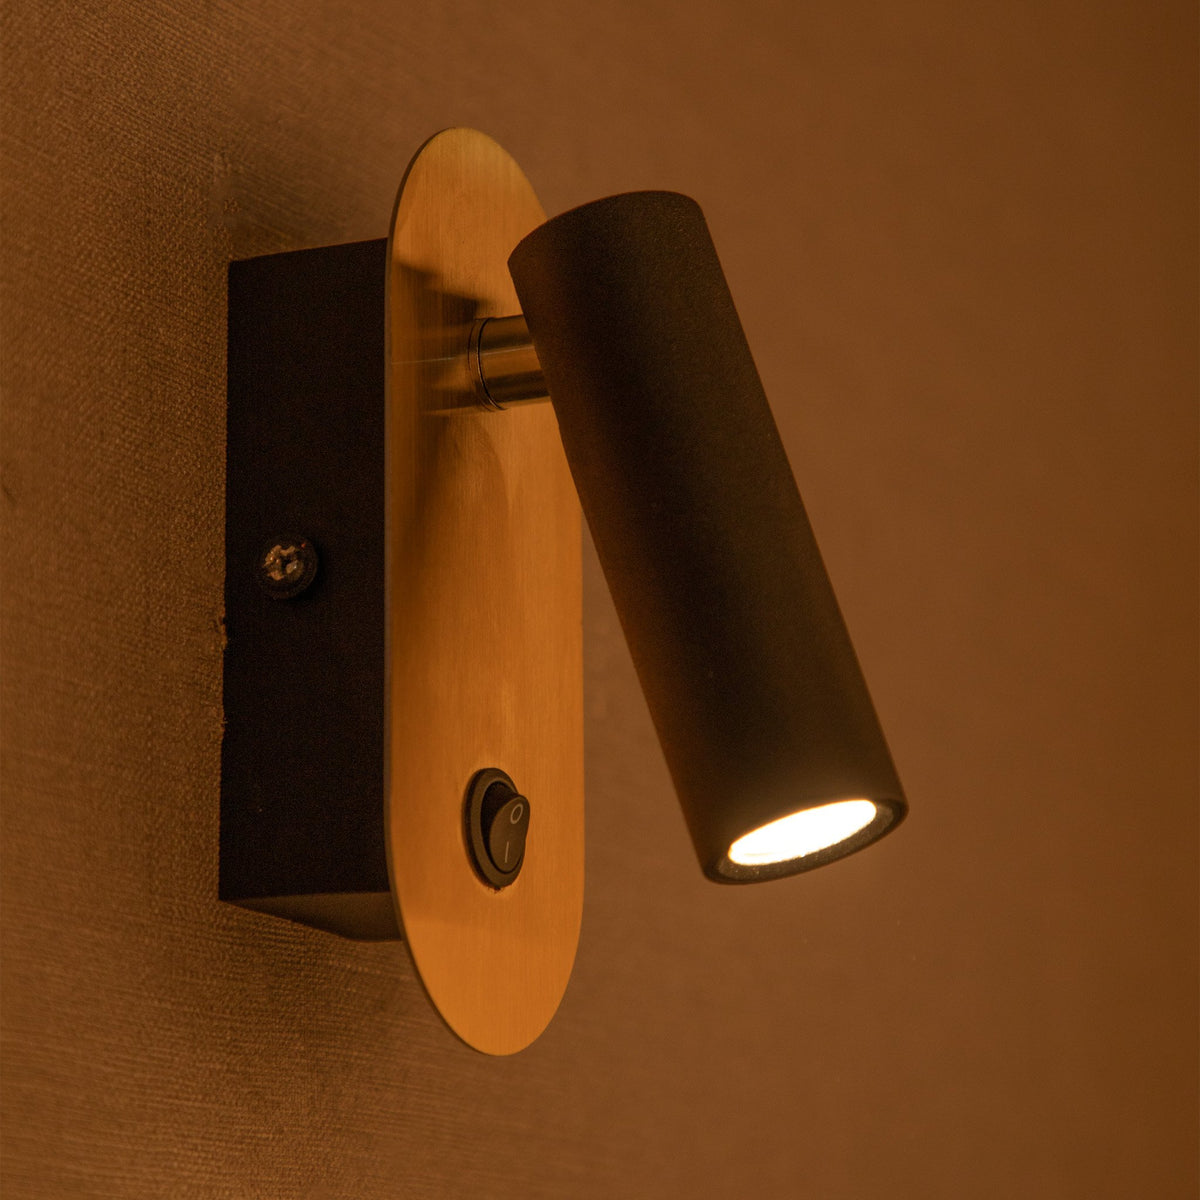 Buy Touch Me Brass LED Light bangalore